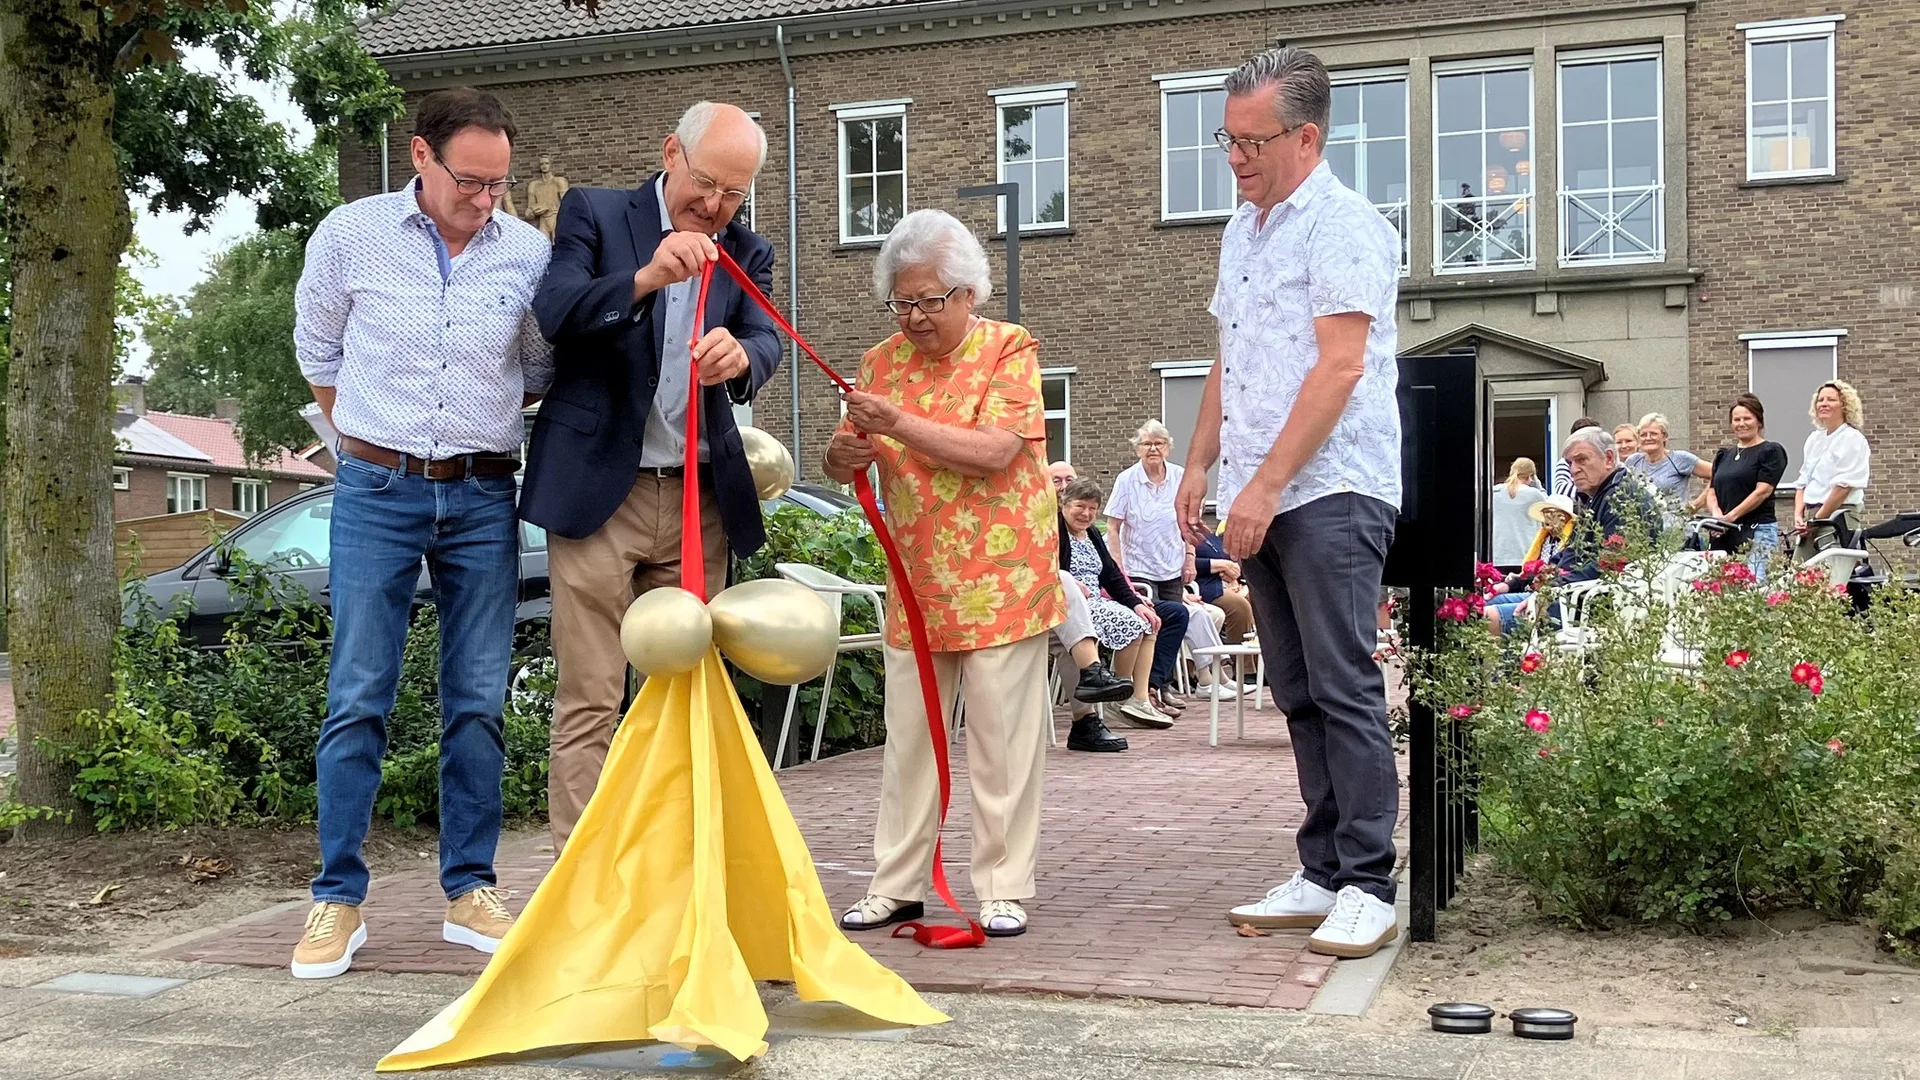 The Forget-me-not-pad opened in the guesthouse as a symbol of dementia-friendly Deurne